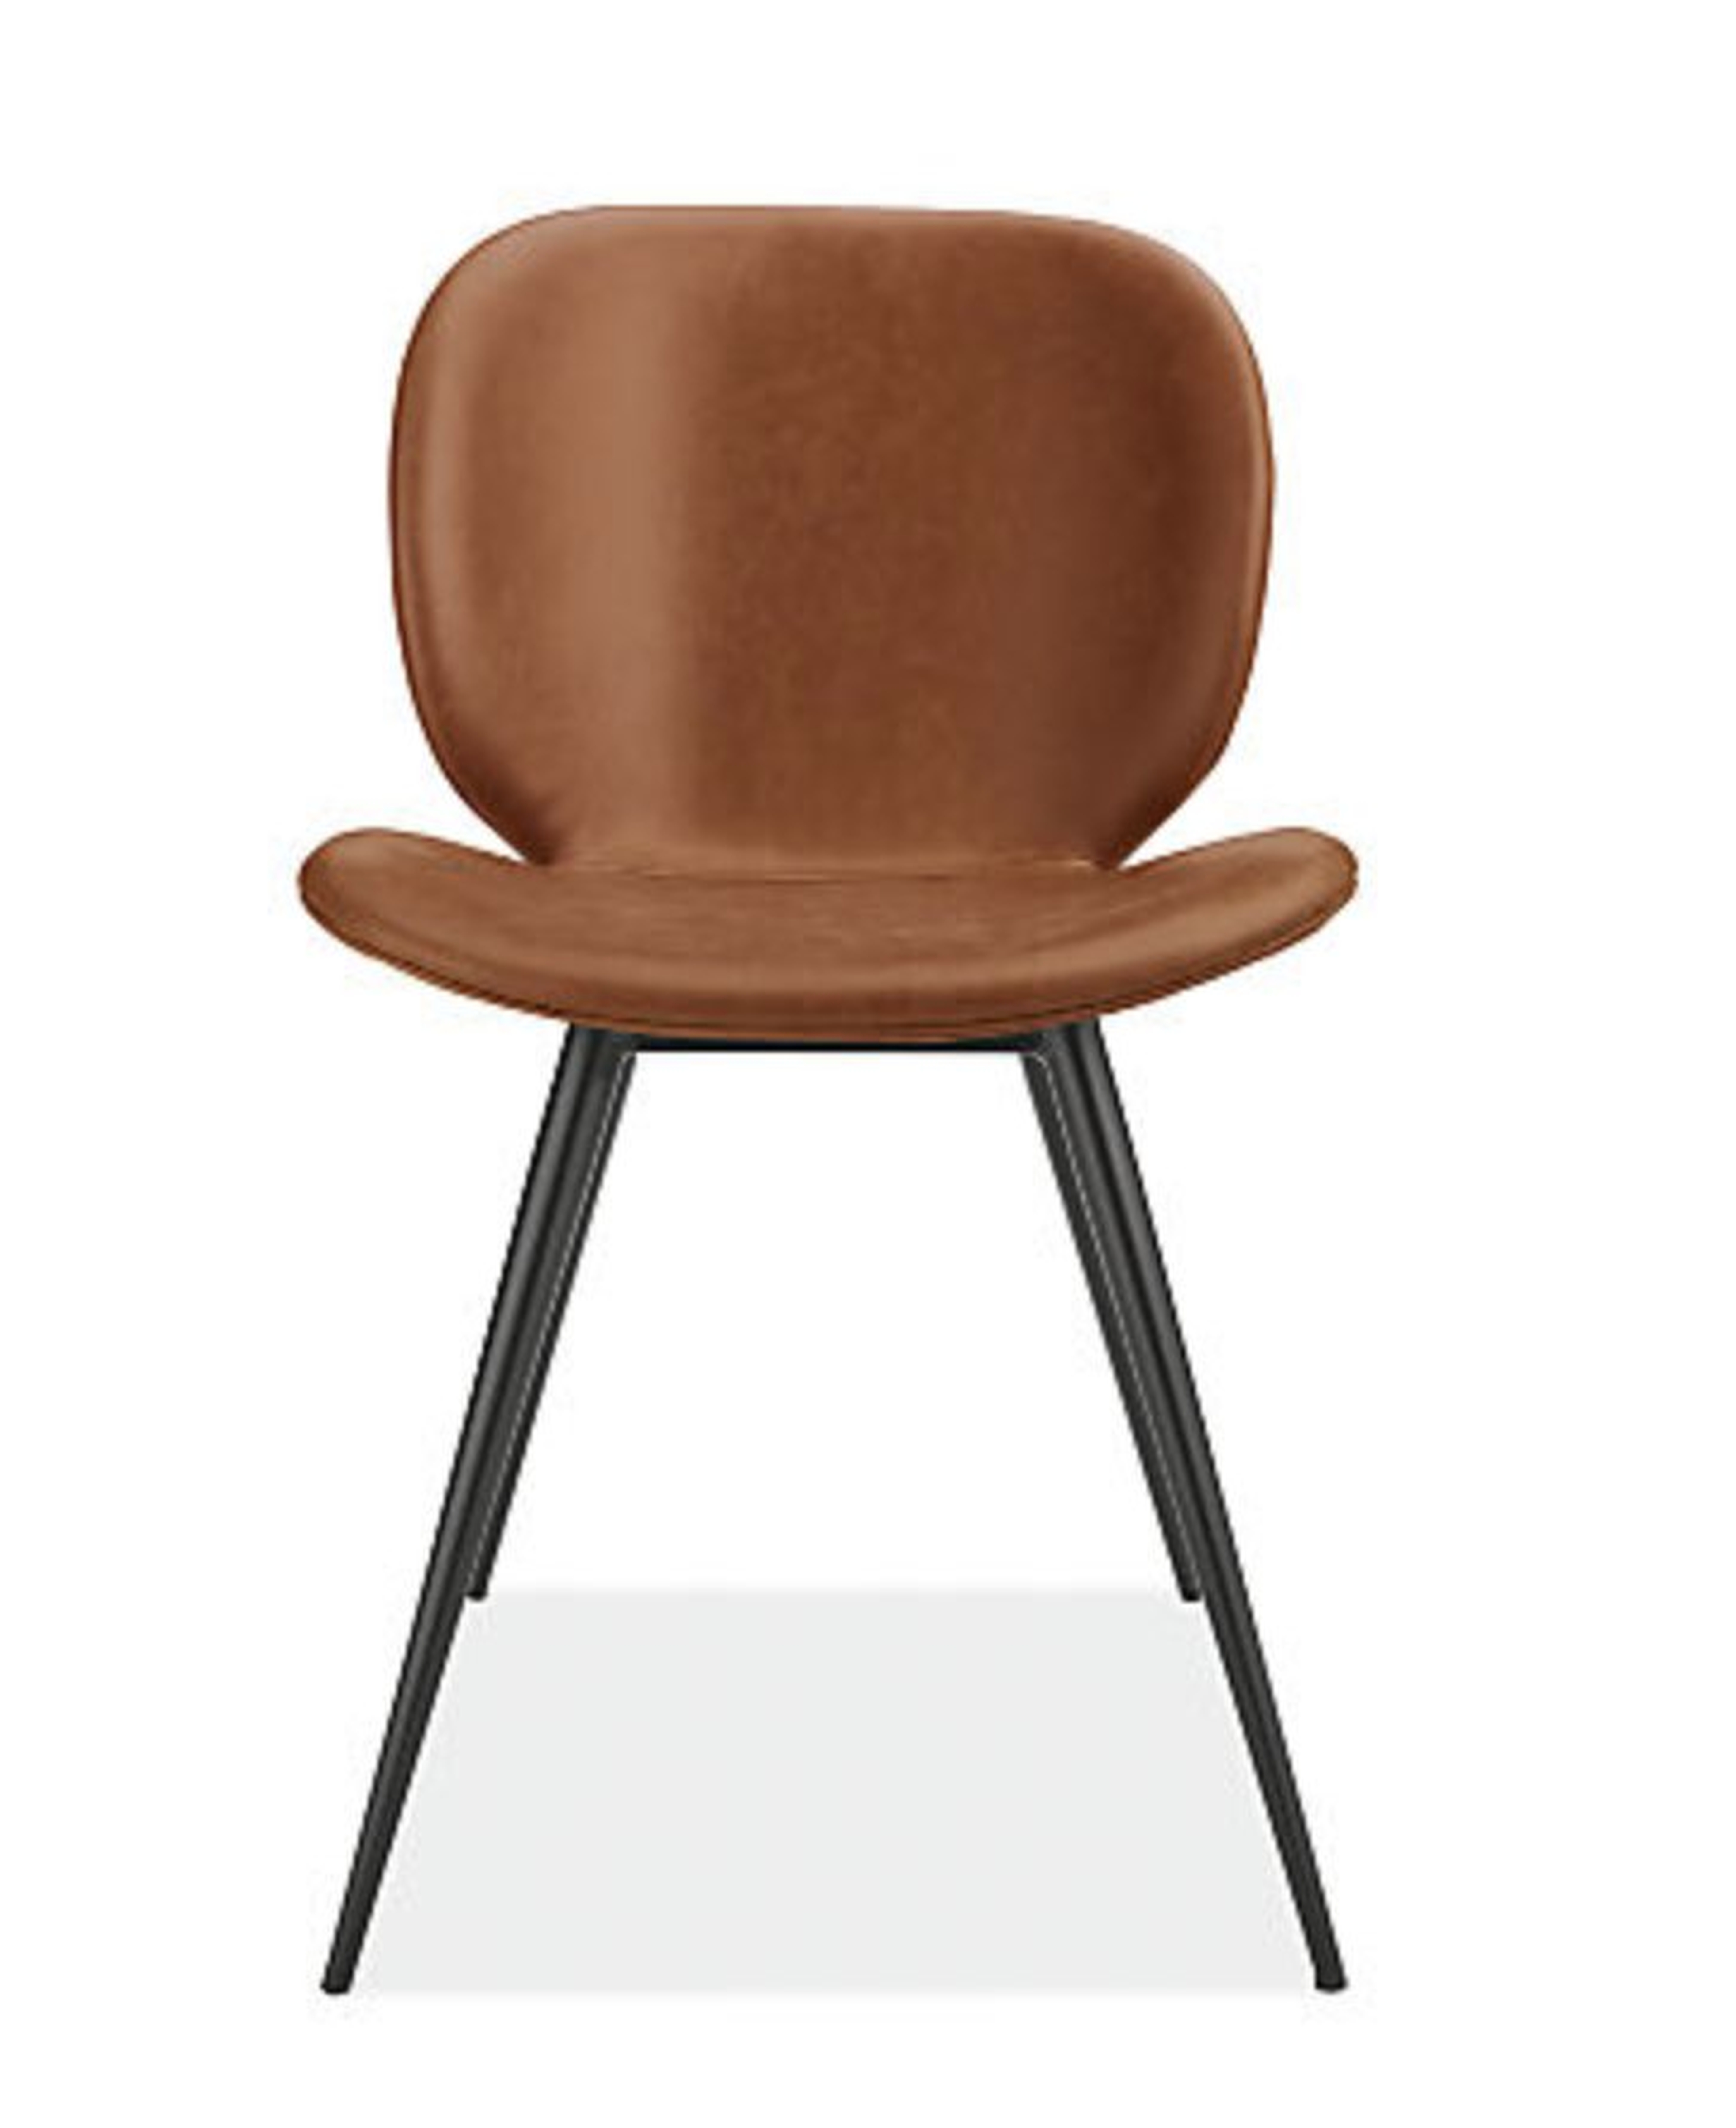 Gwen Synthetic Leather Chair- Brown - Room & Board